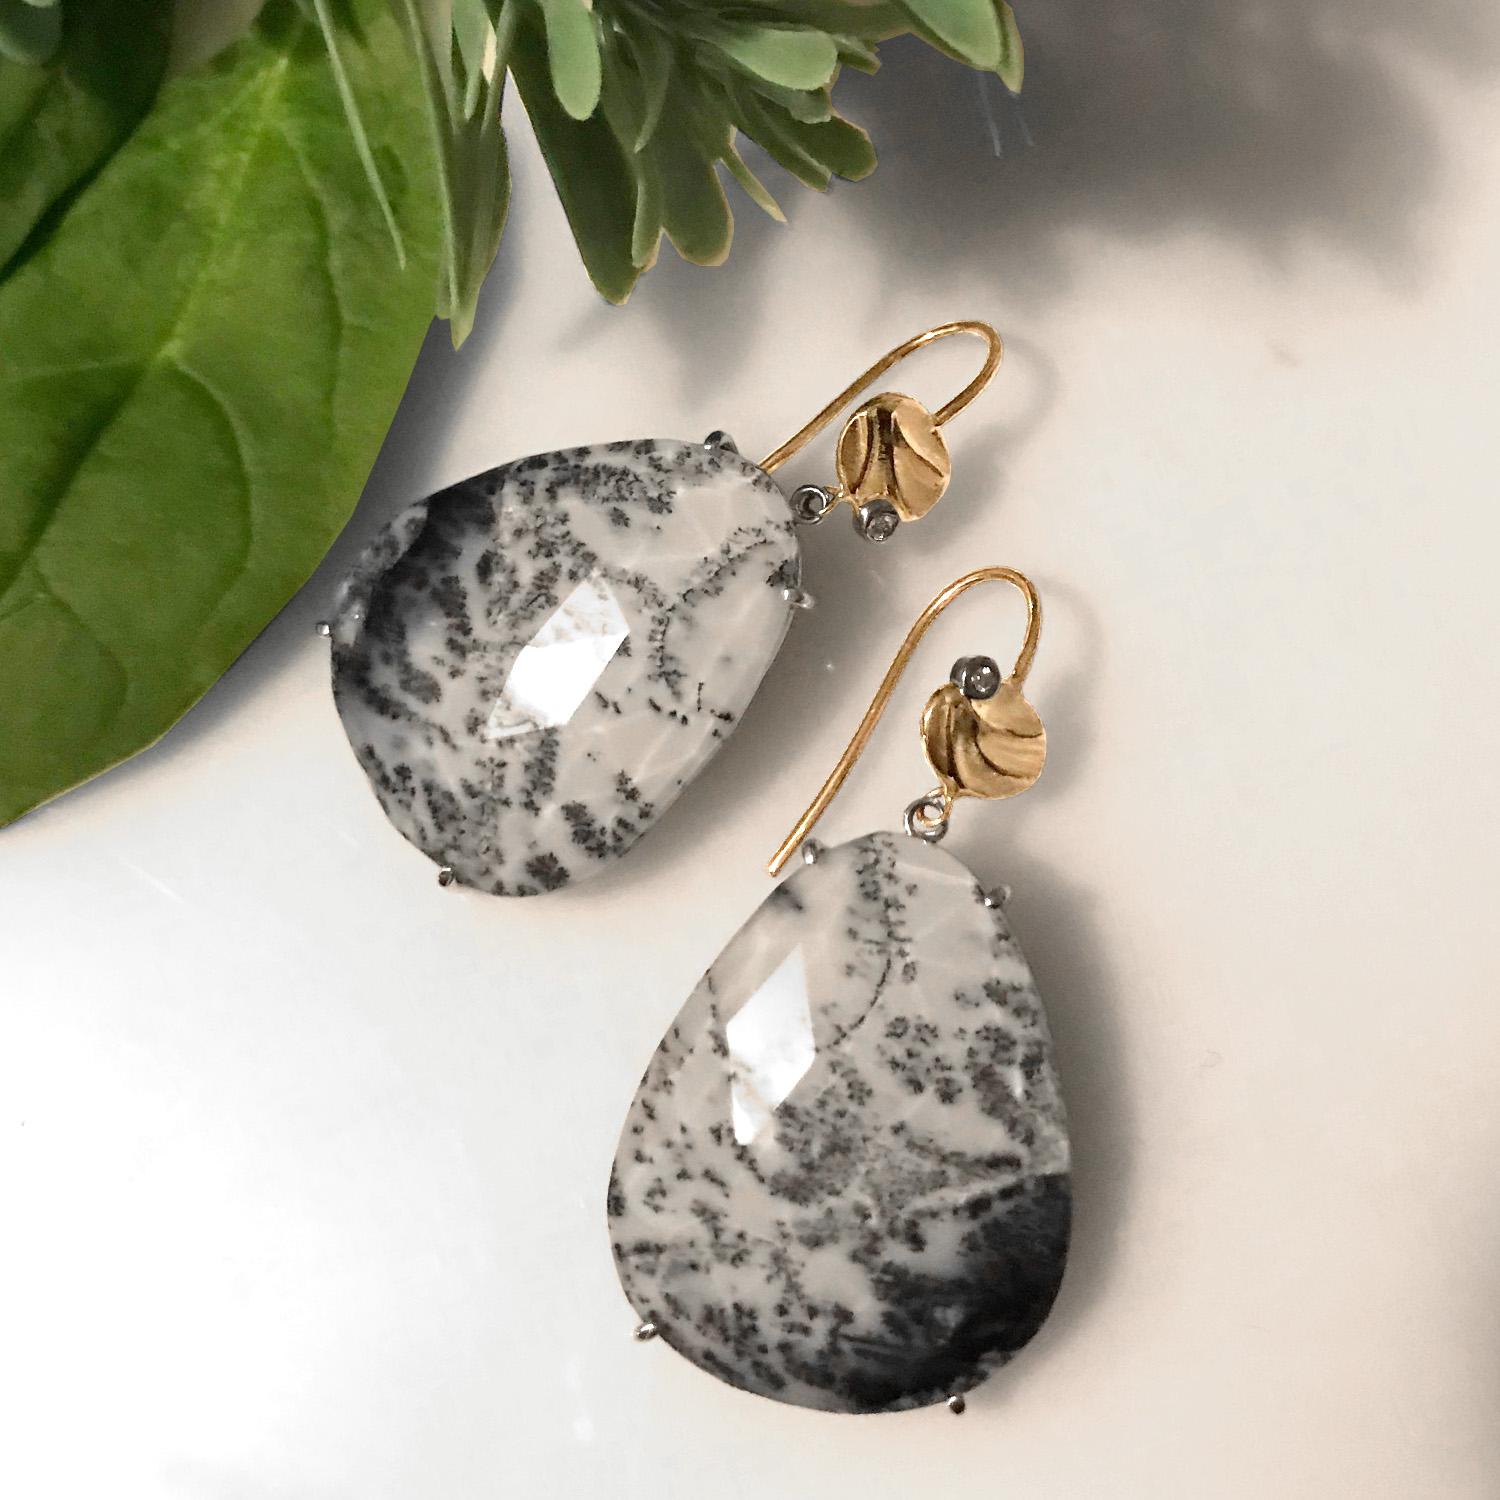 K.Mita's contemporary Vermont Earrings, which are made from 14 Karat Yellow Gold (Upper elements) and Sterling Silver wire (Dendritic Opal settings), feature 52 carat painter-like Dendritic Opals (with faceted clear Quartz) accented with 0.02 Carat